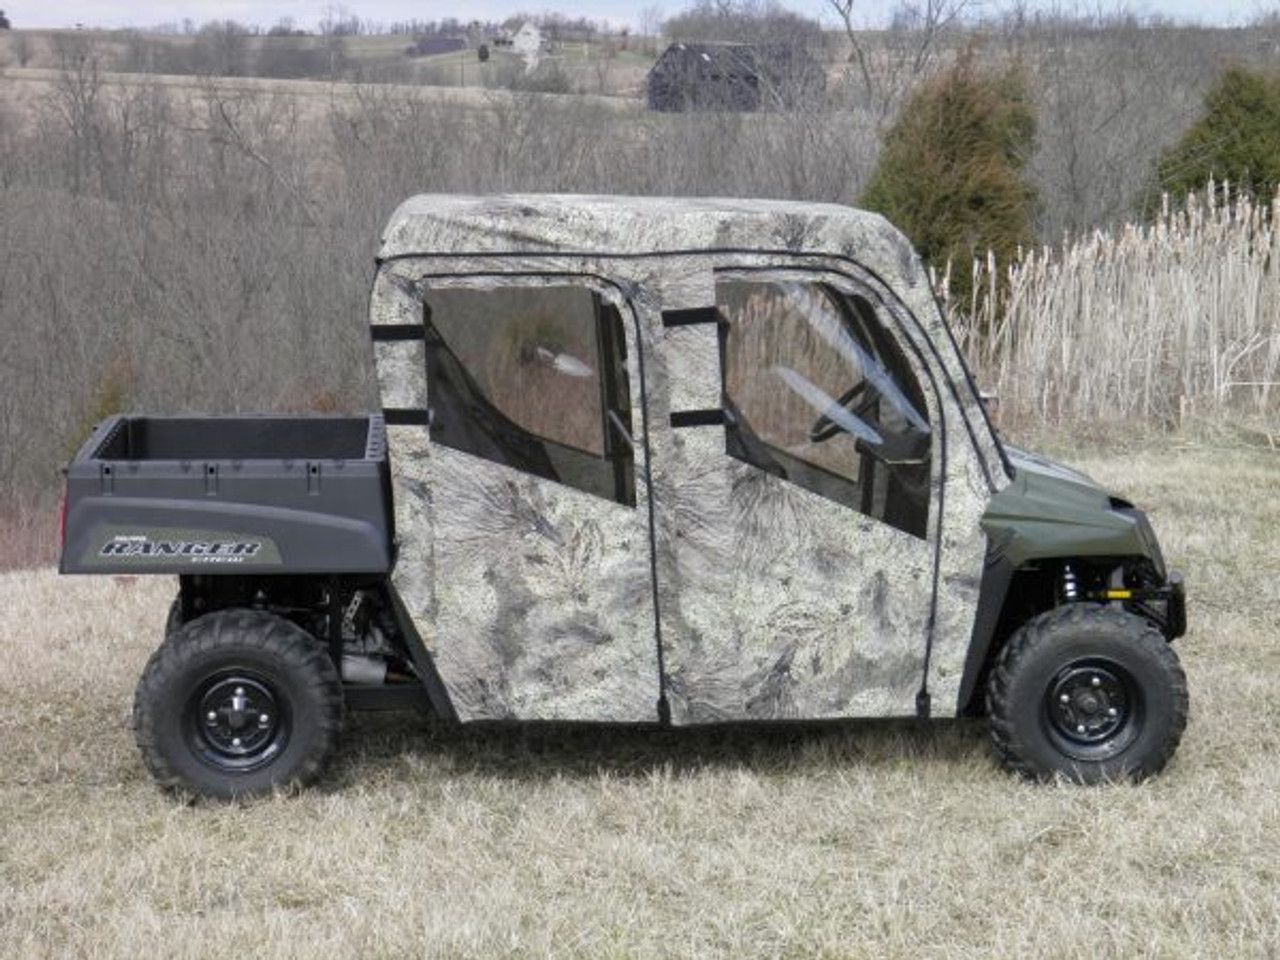 3 Star side x side Polaris Ranger Mid-Size Crew 500/570 full cab enclosure side view